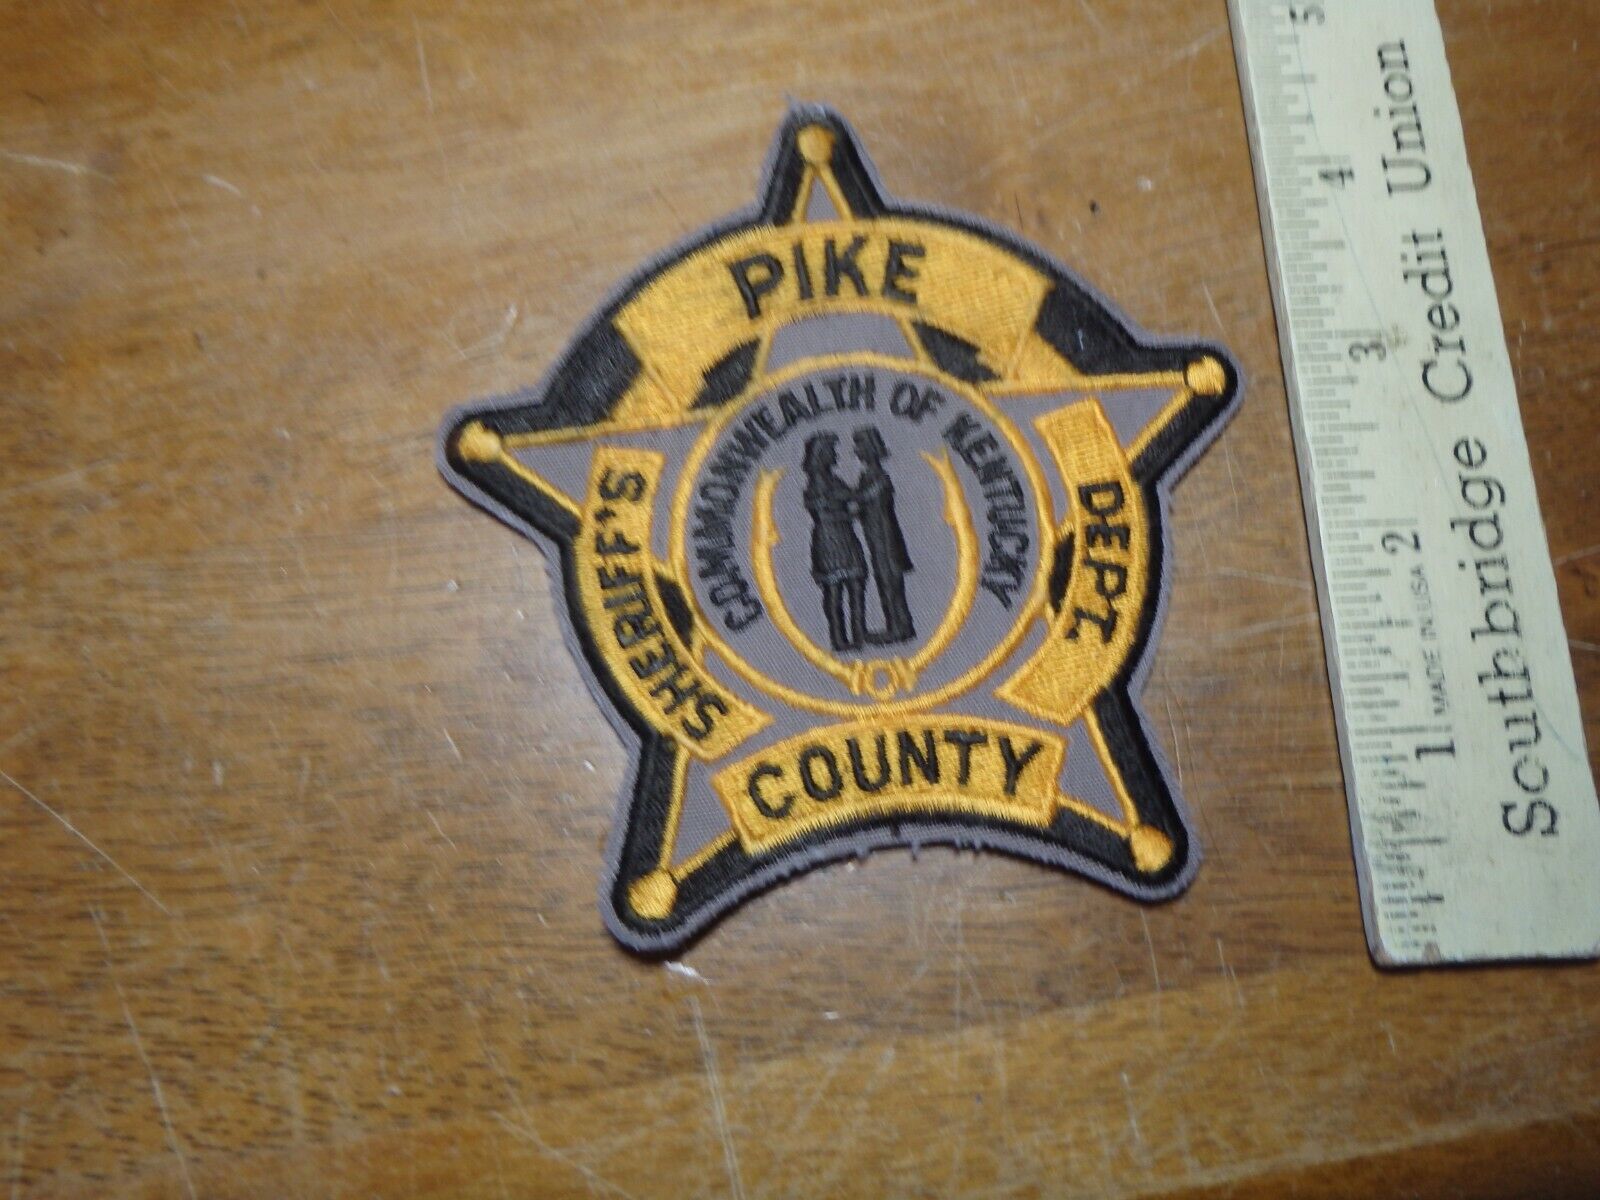 Pikes County Kentucky  Sheriffs Office  Department Obsolete  Patch Bx 2 #20